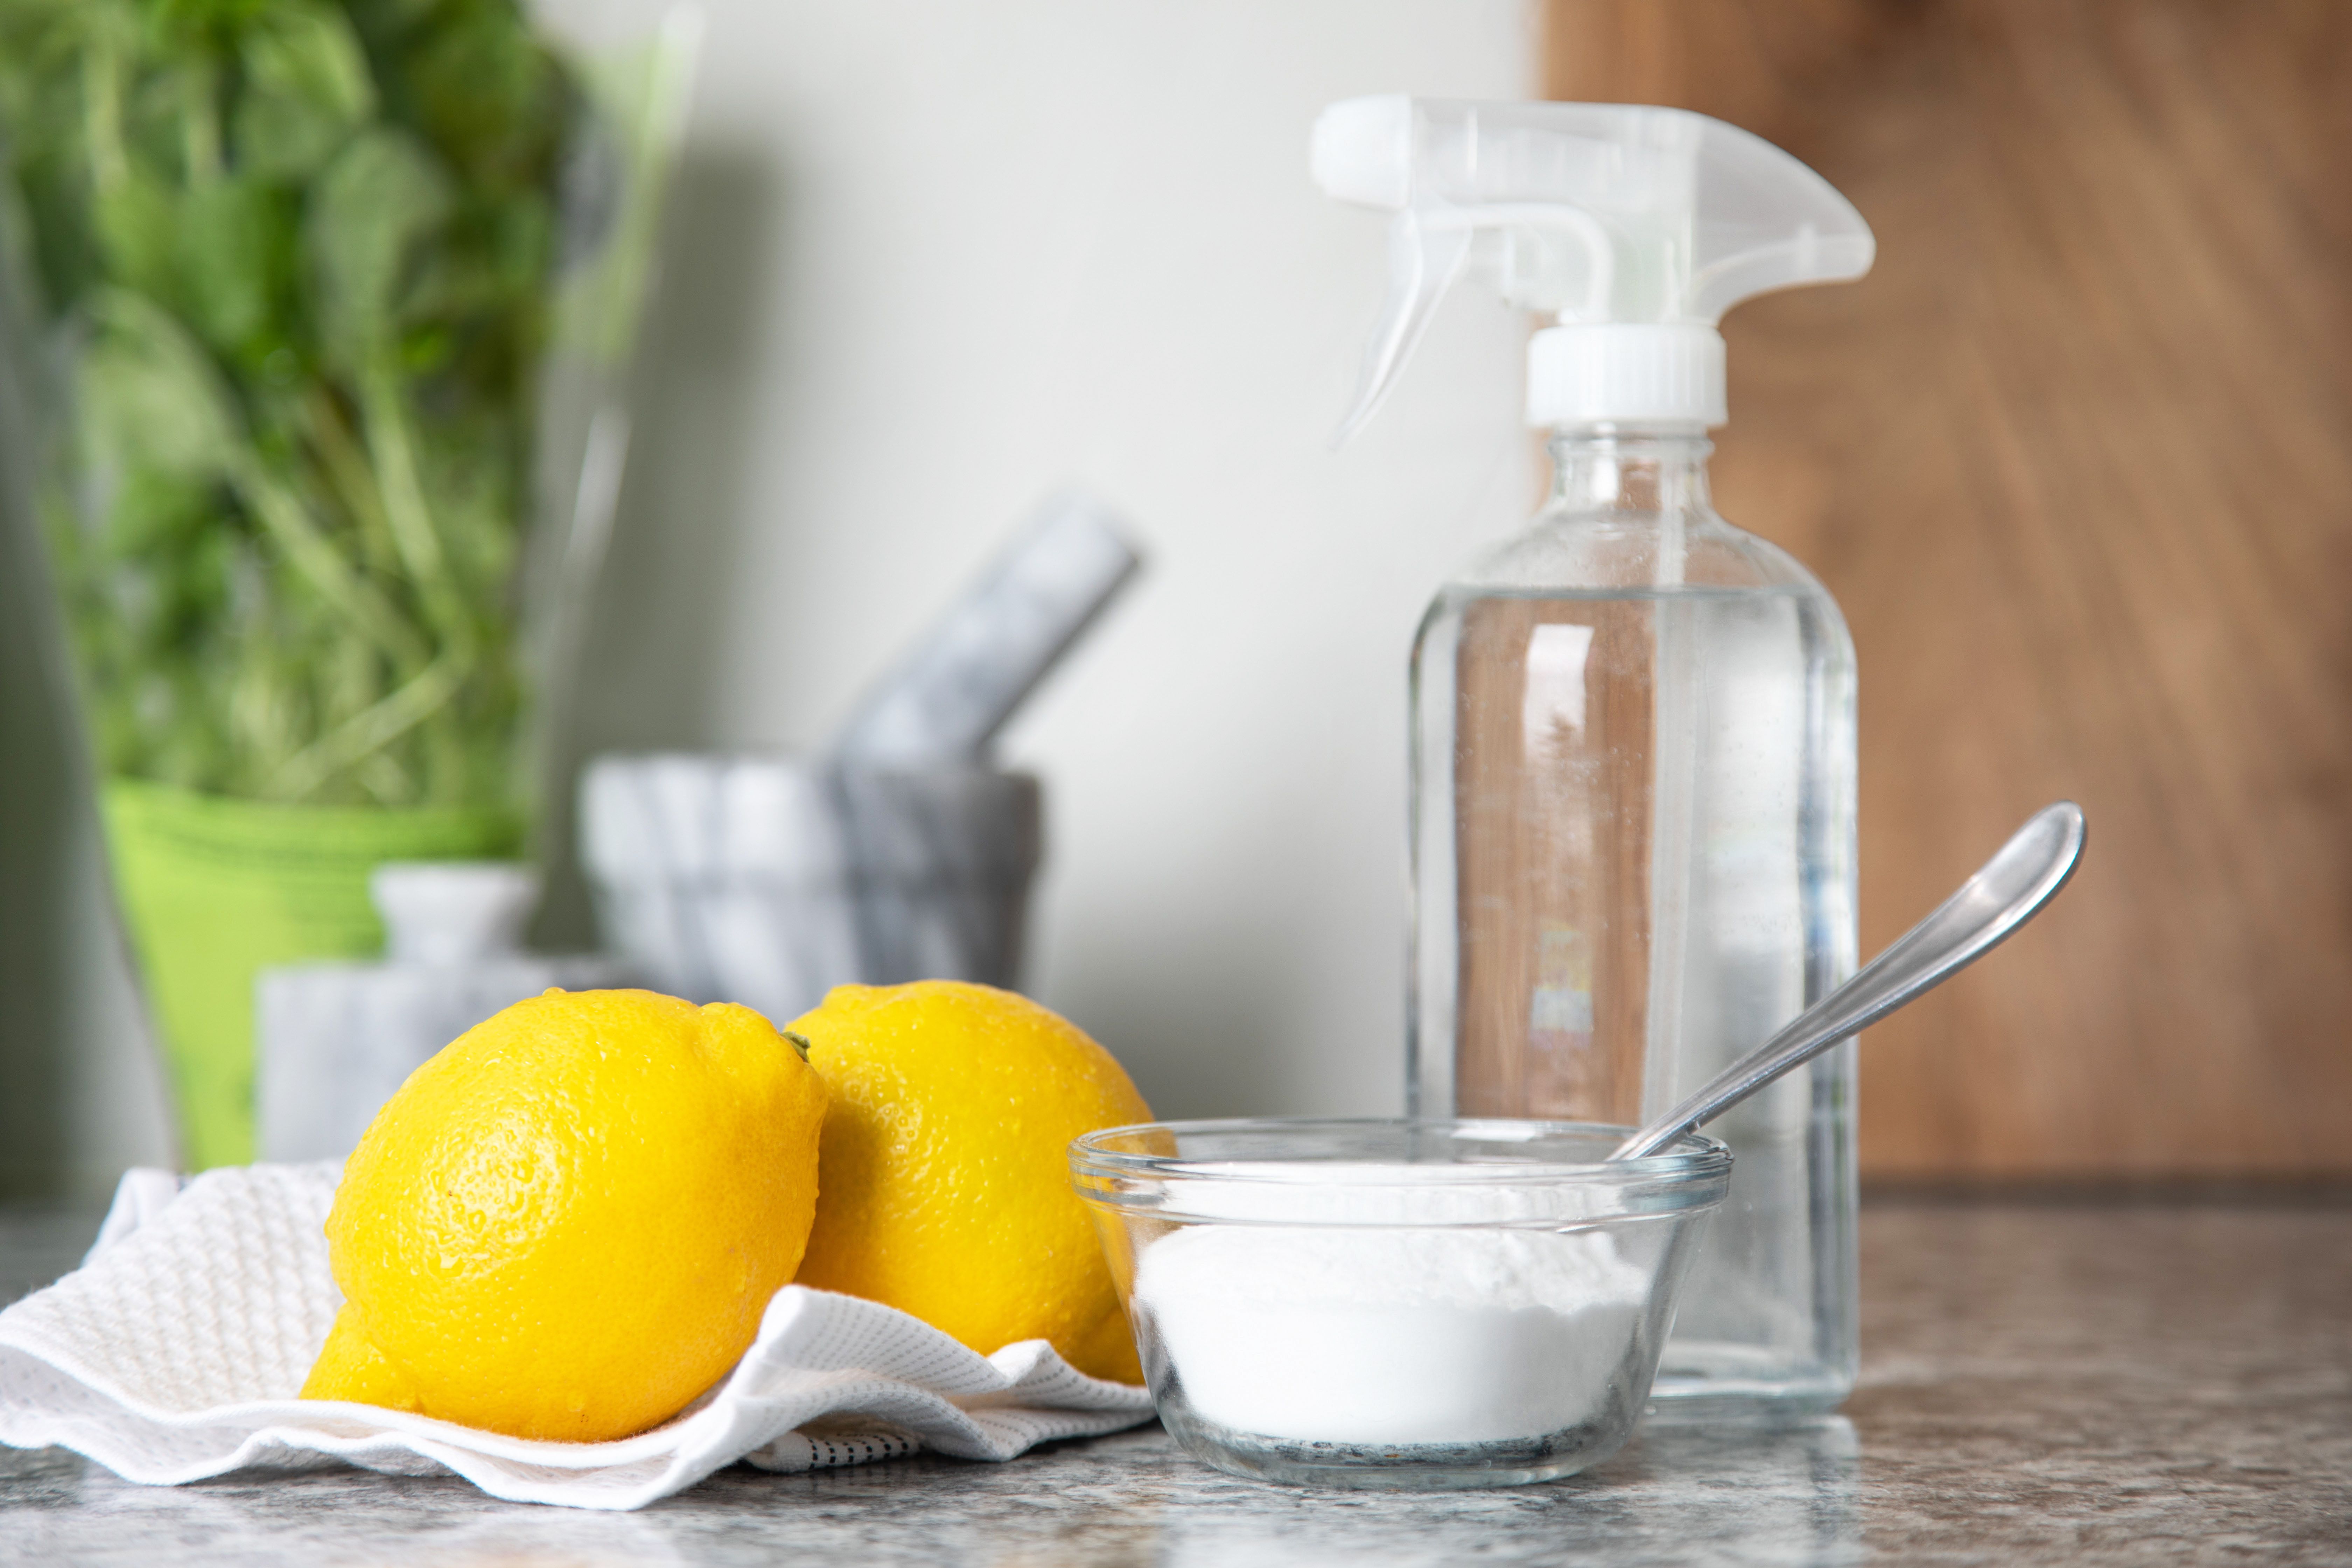 The Homemade and Natural Cleaning Products You Should Know